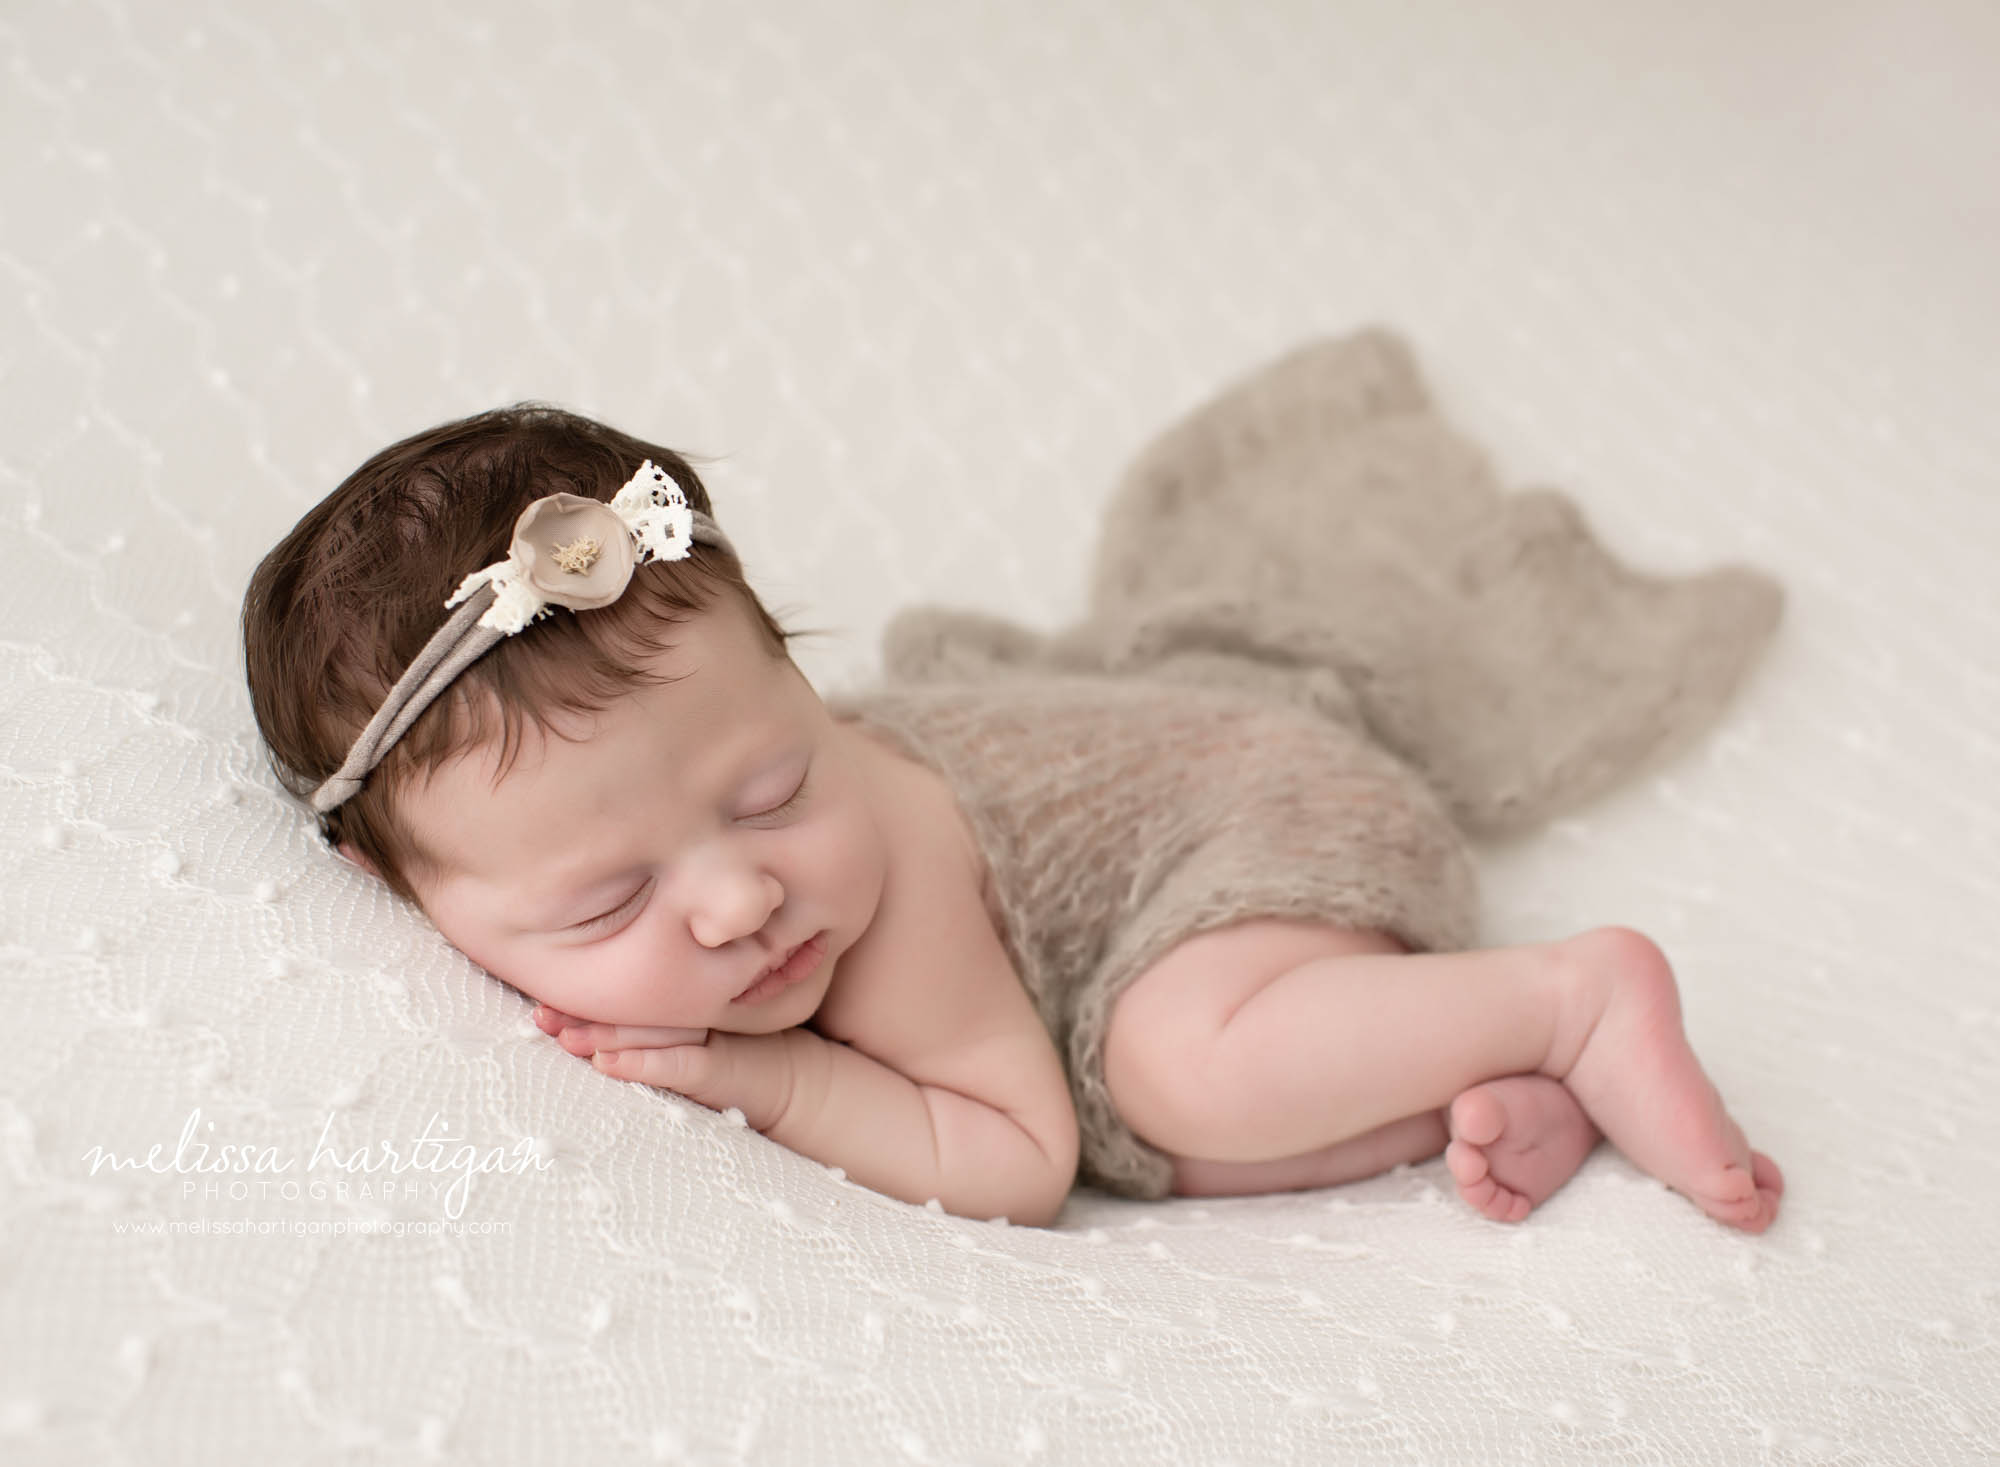 Baby girl posed on side with hand under chin and flower headband